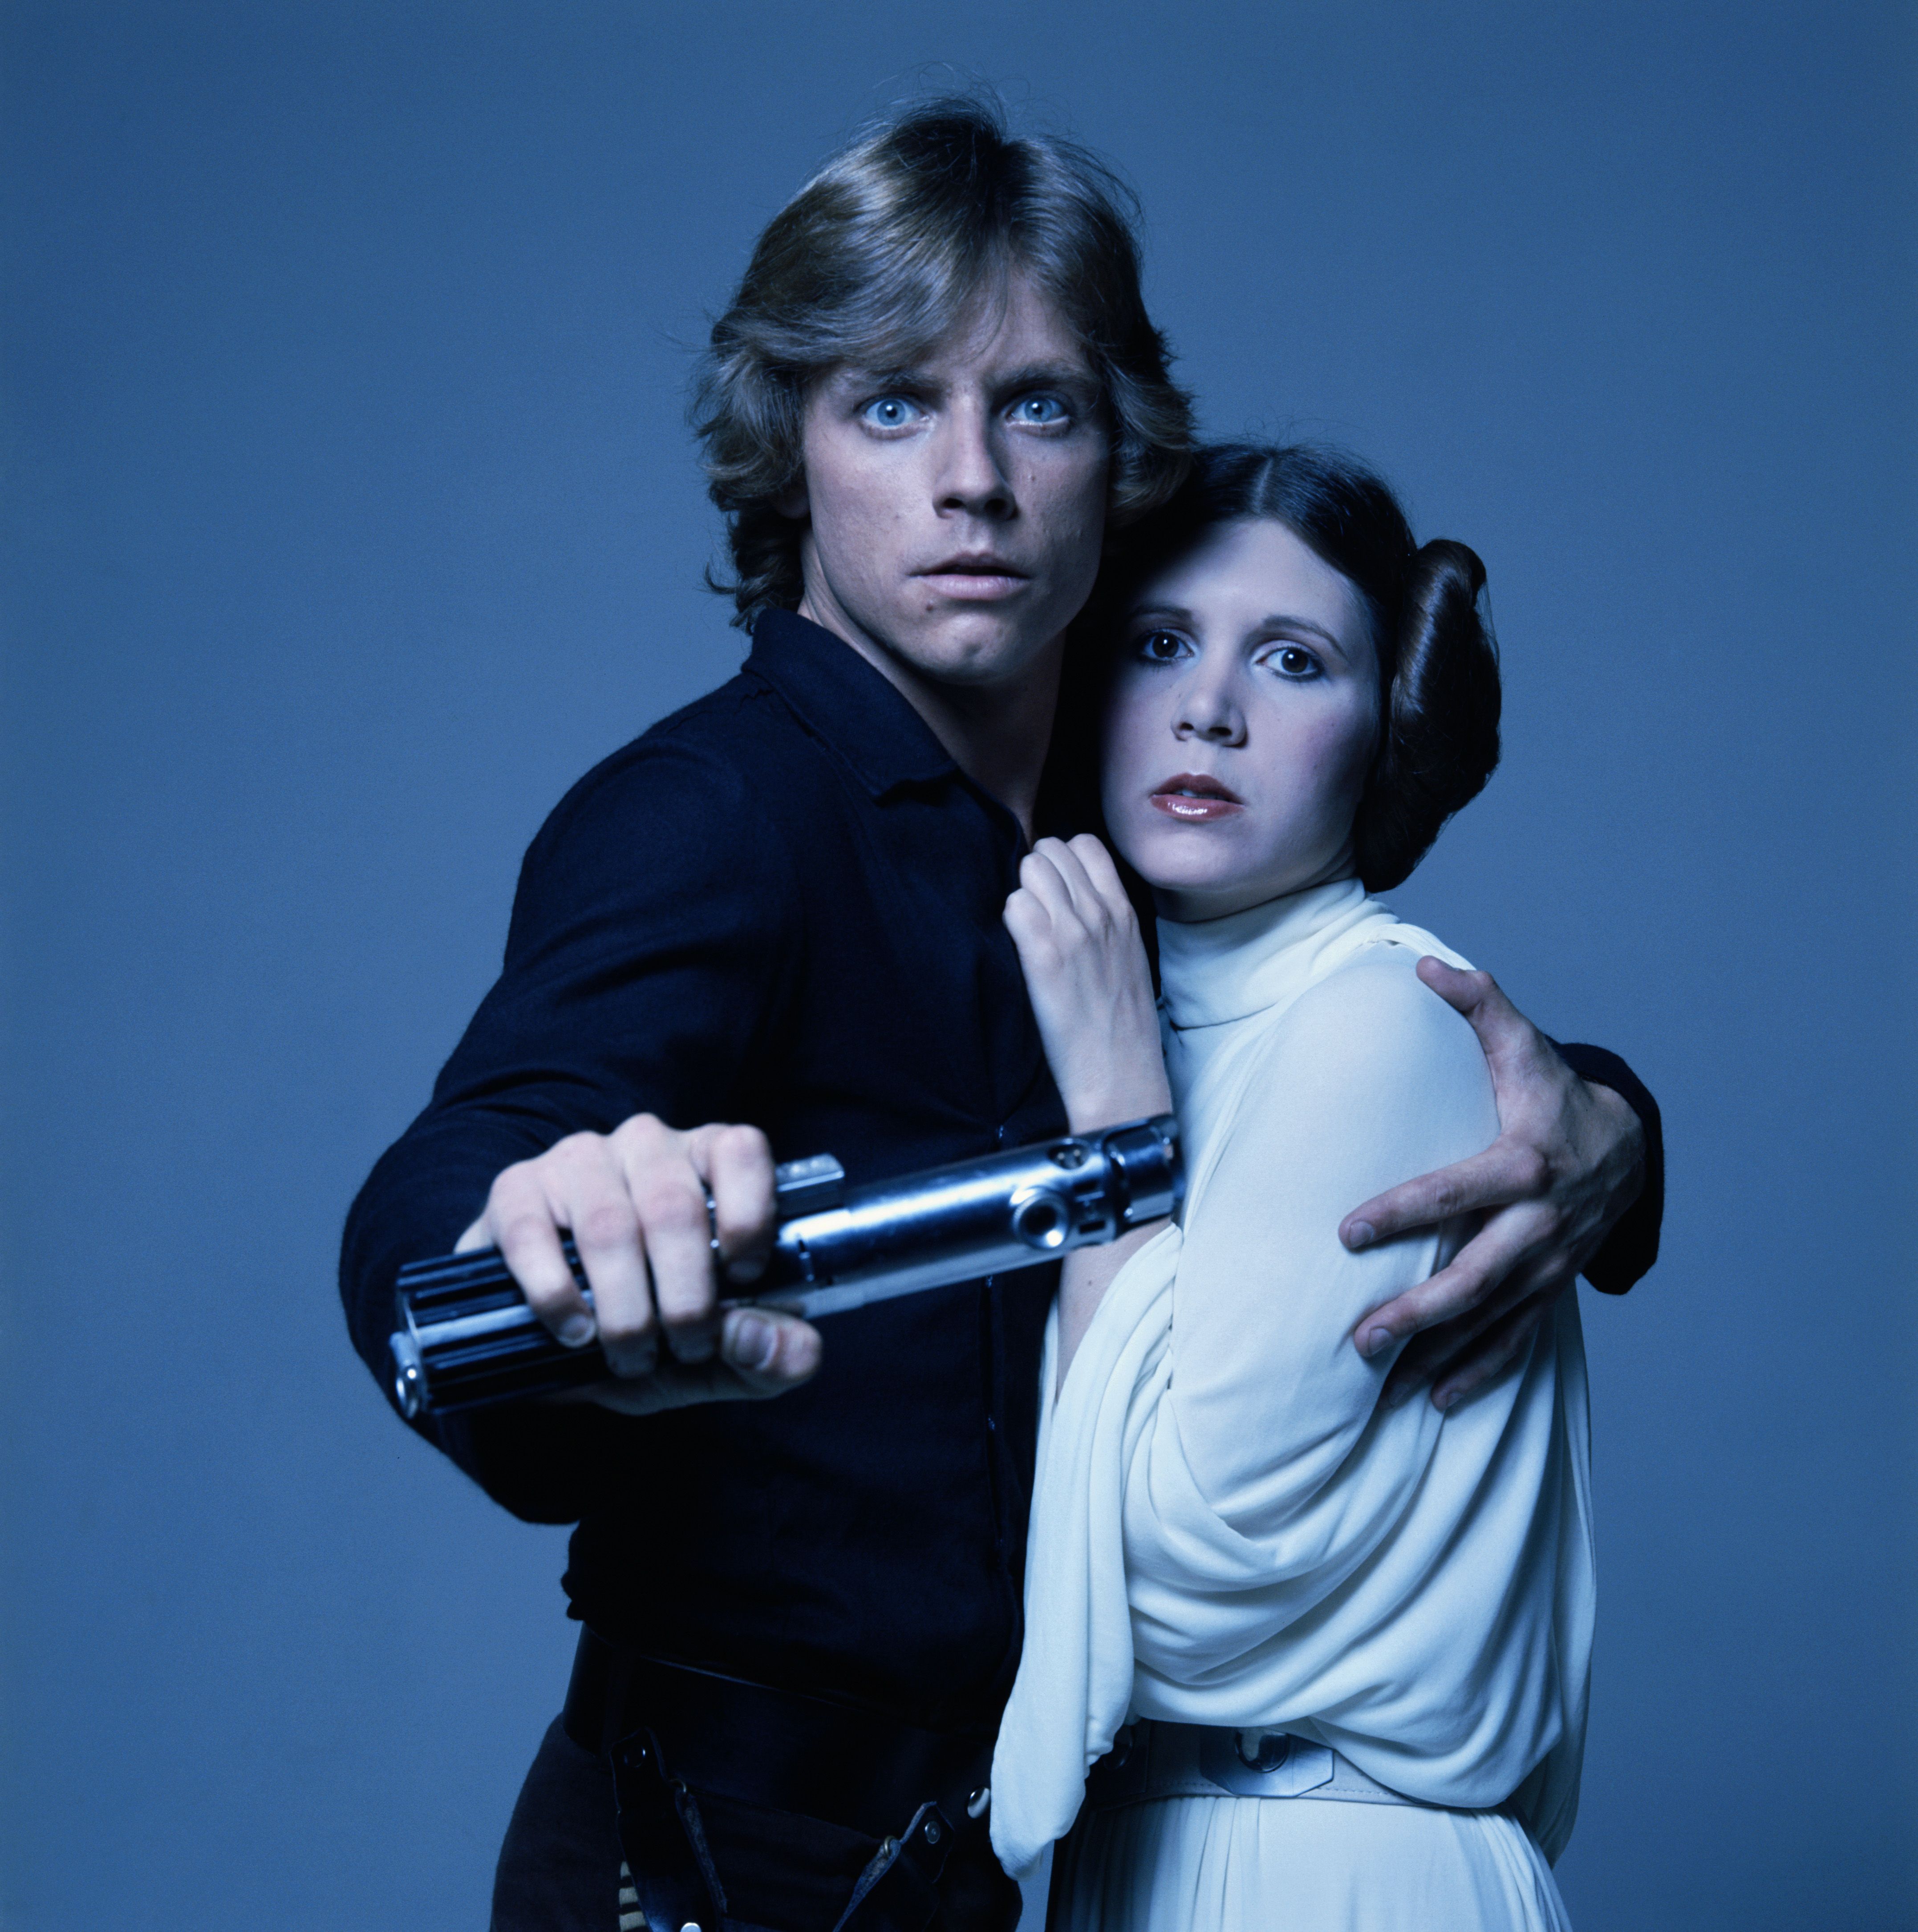 Star Wars star Mark Hamill discusses recasting Luke and Leia - CNET